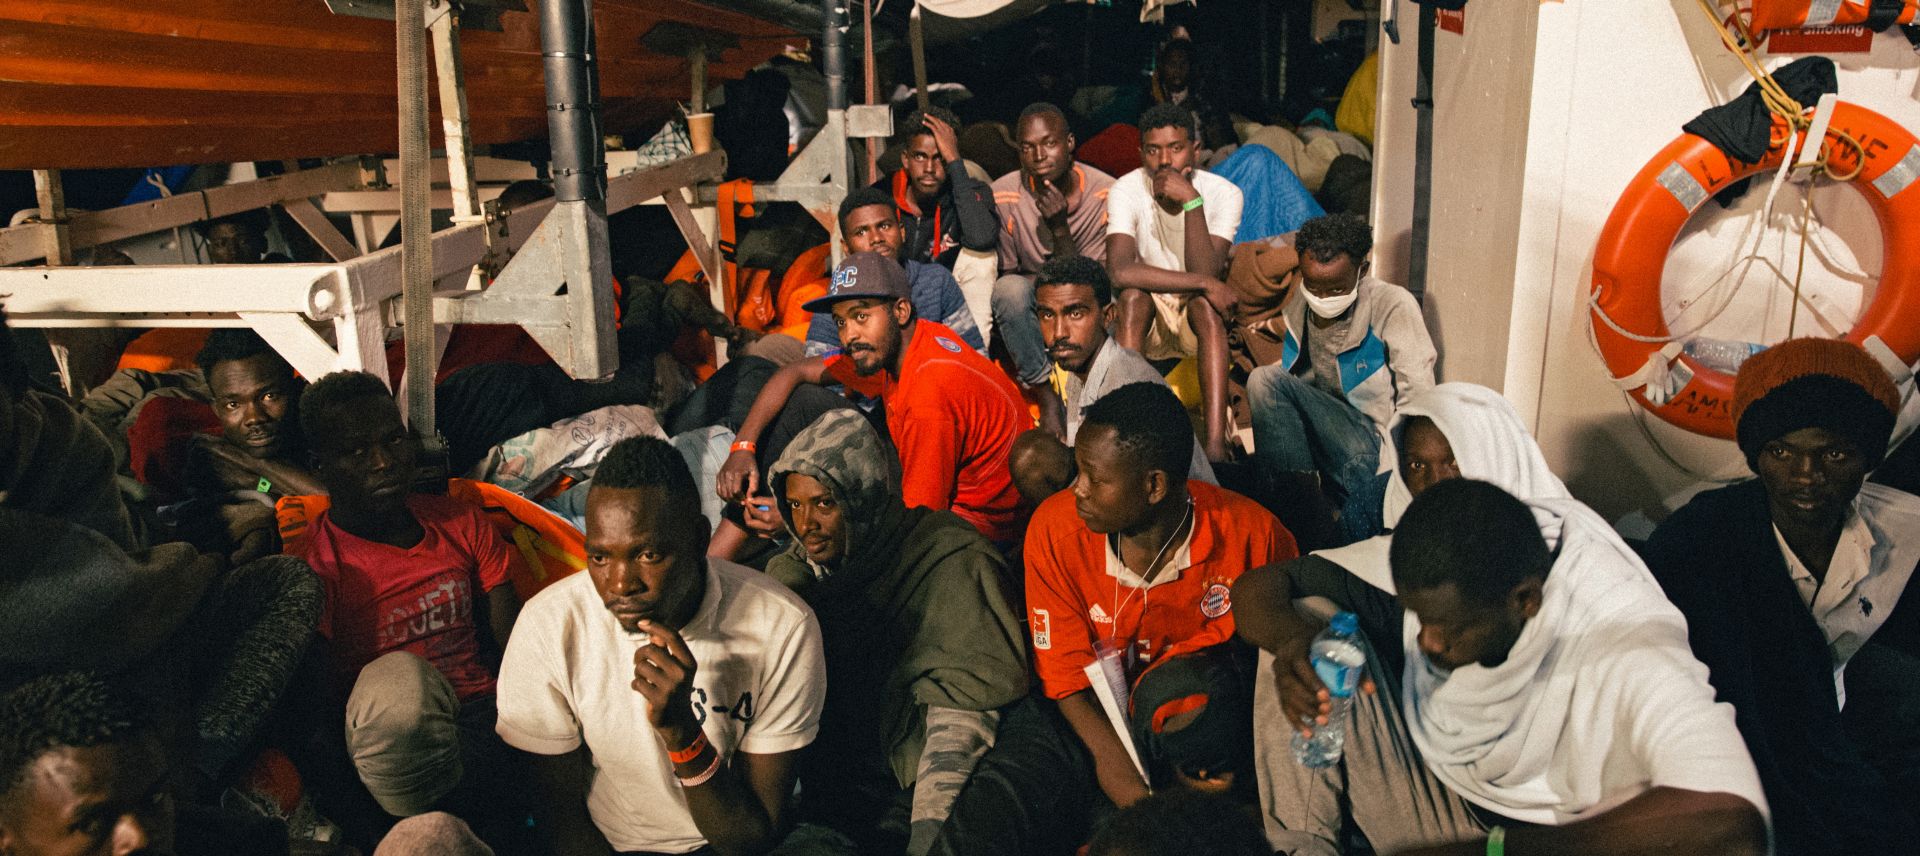 epa06838217 A handout photo made available by German NGO 'Mission Lifeline' on 25 June 2018 shows migrants aboard the NGO's rescue vessel 'Lifeline' in the Mediterranean, 25 June 2018. Members of the German parliament Bundestag on 25 June reported from their visit to the ship saying they witnessed a 'catastrophic' situation. Both Italy and Malta deny the ship an entry to one of their country's ports.  EPA/Felix Weiss / HANDOUT  HANDOUT EDITORIAL USE ONLY/NO SALES